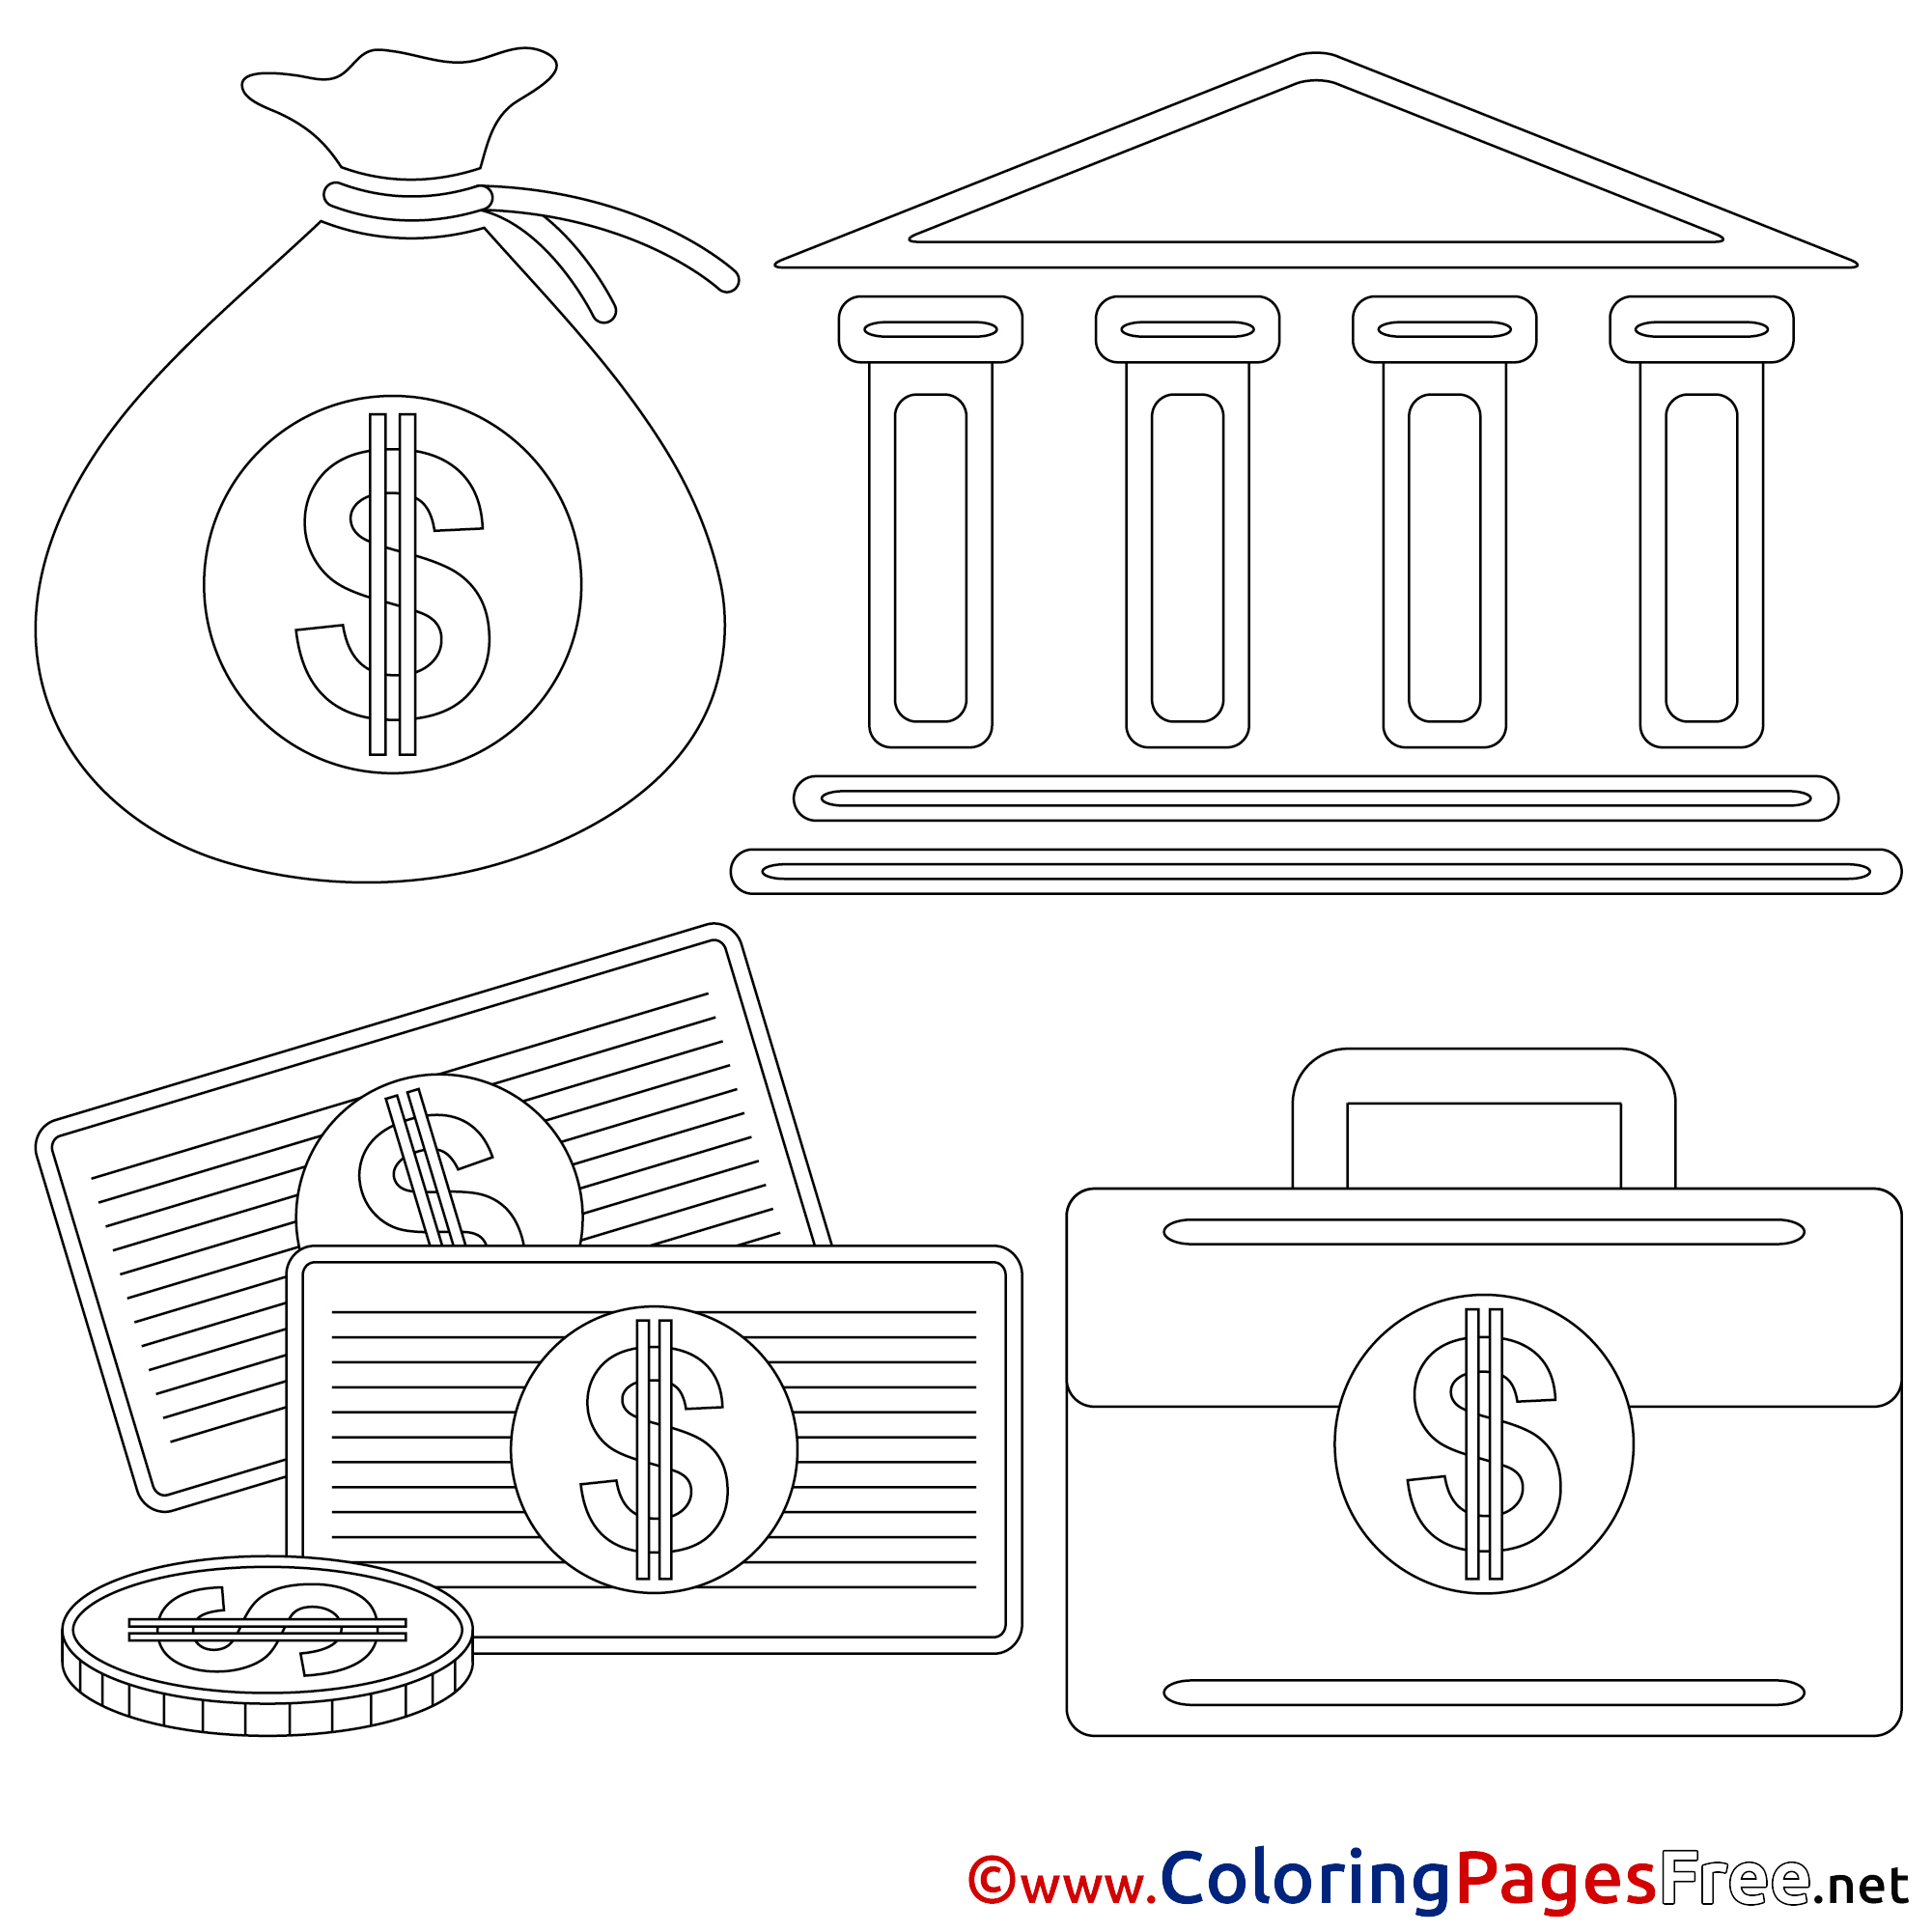 bank_free_colouring_page_business_20161019_1381476247